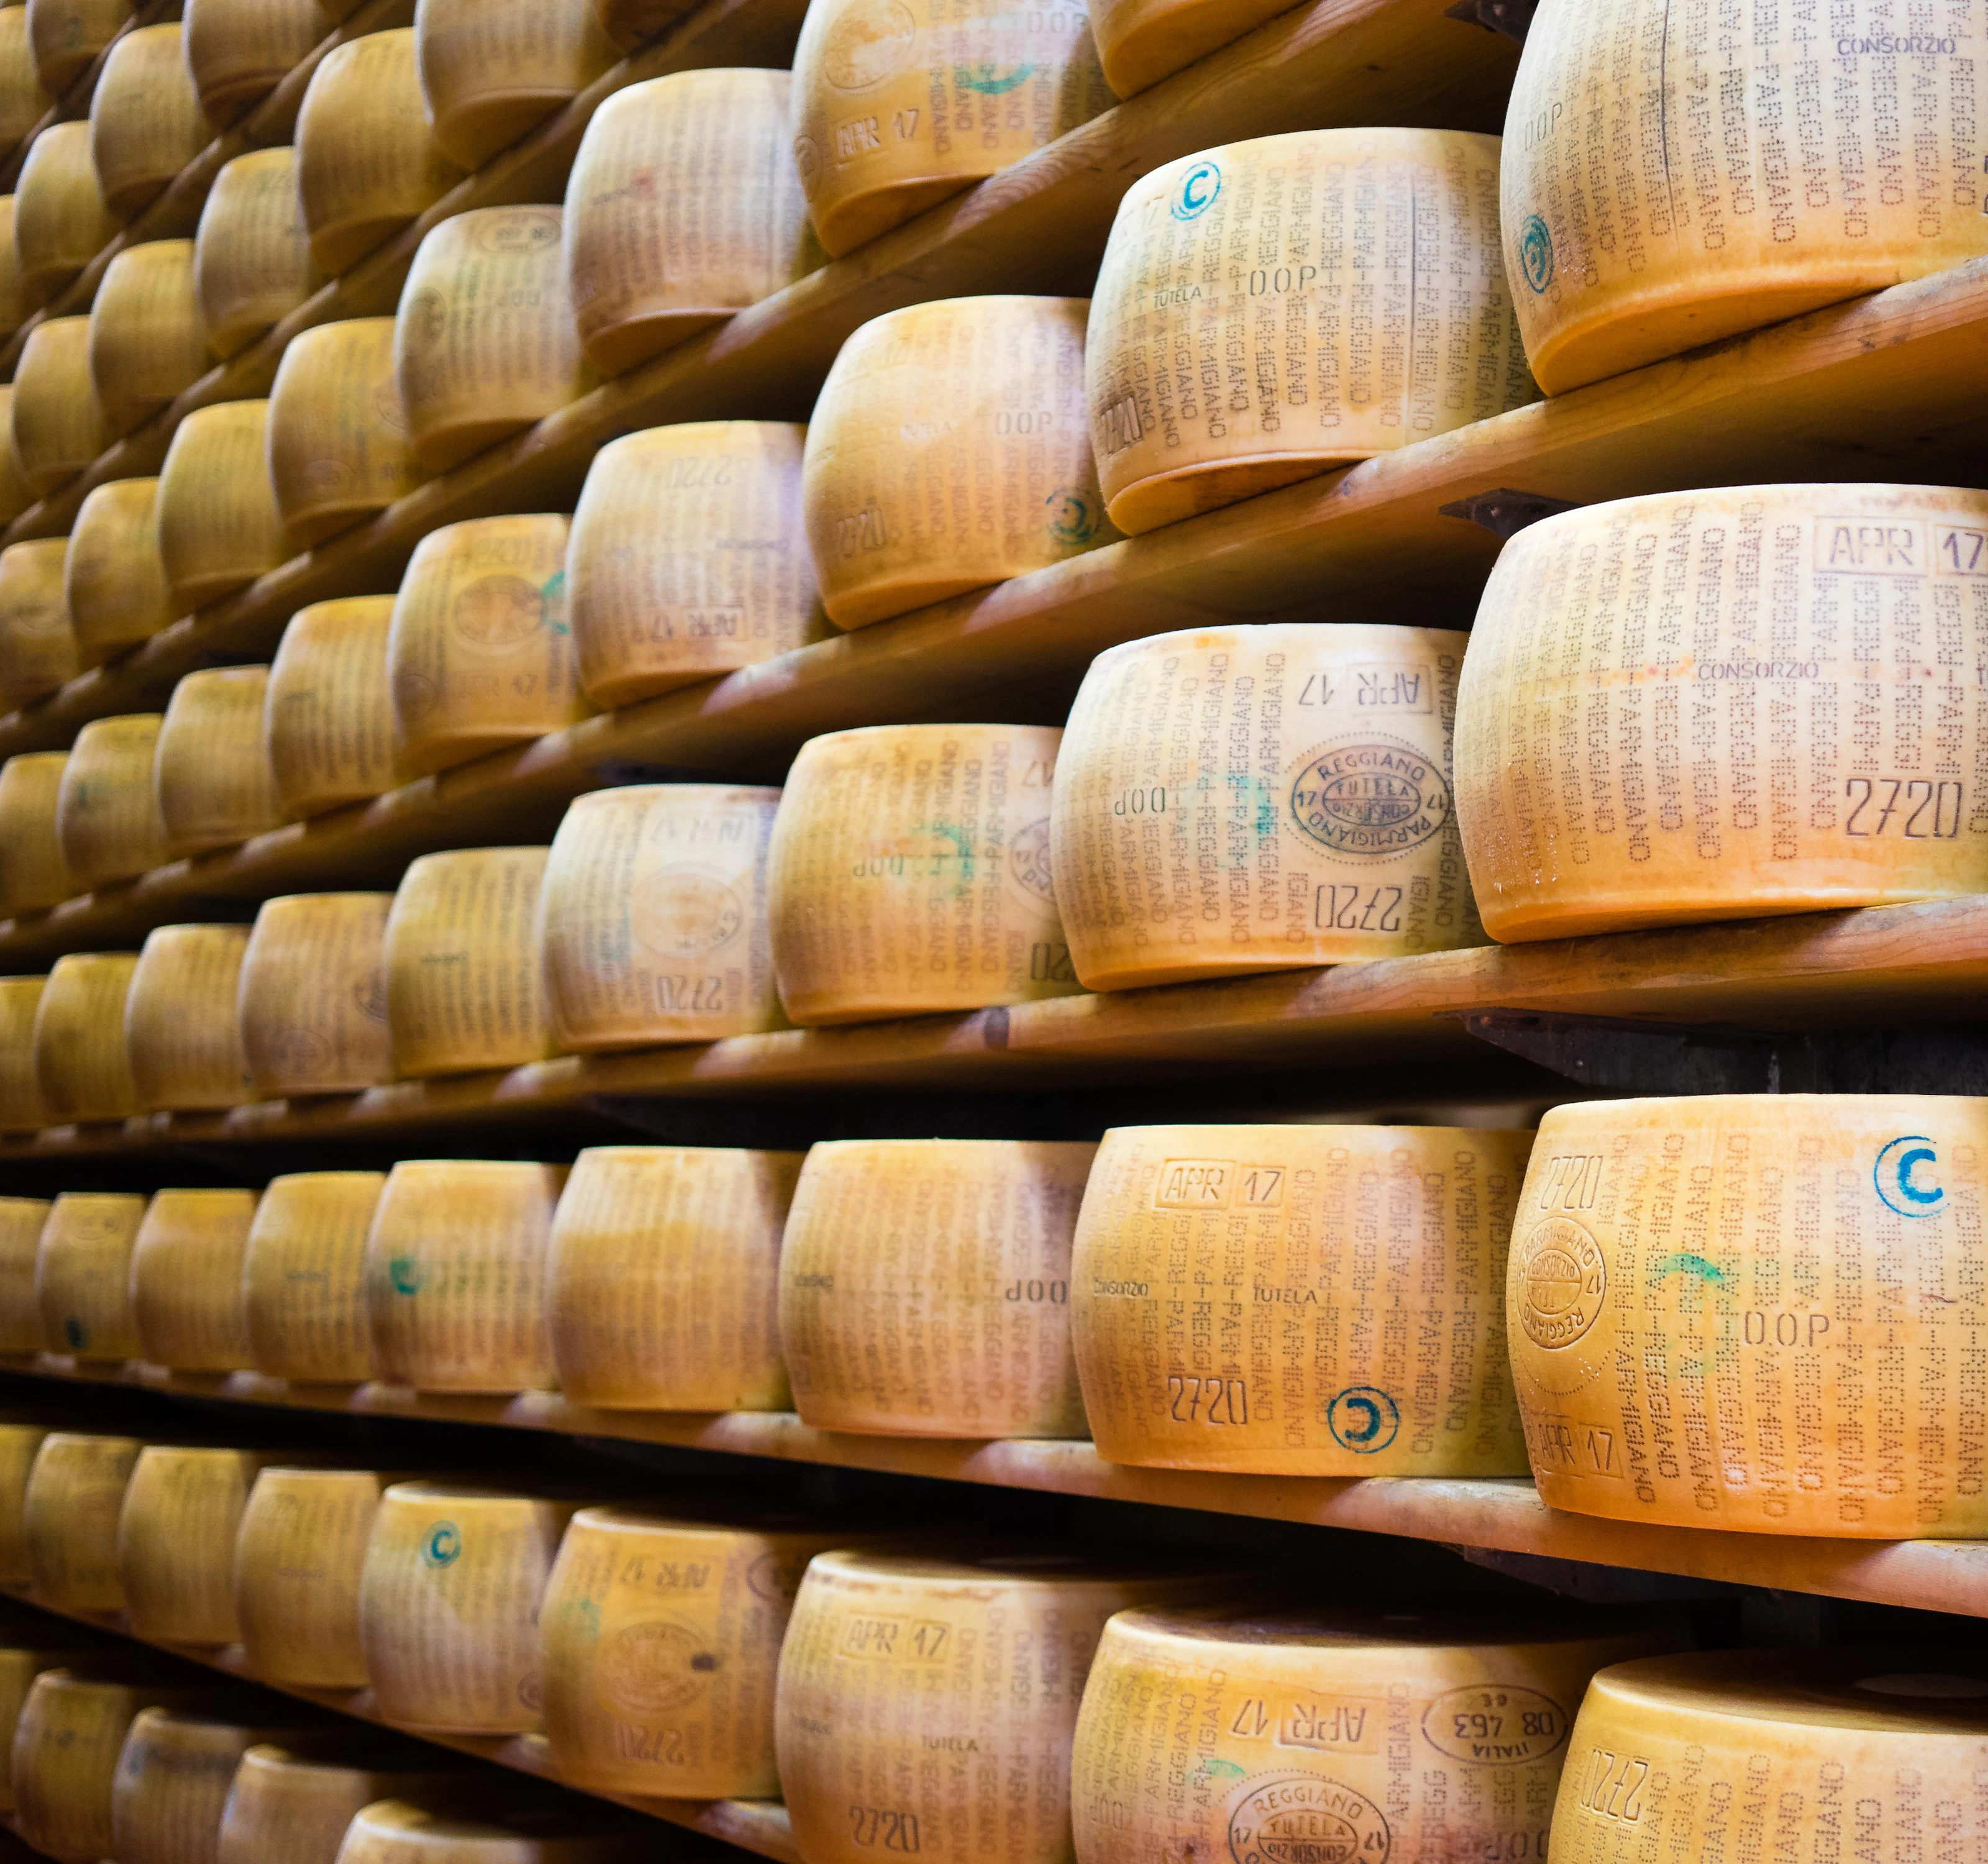 Rows of parmesan wheels on wooden shelves.